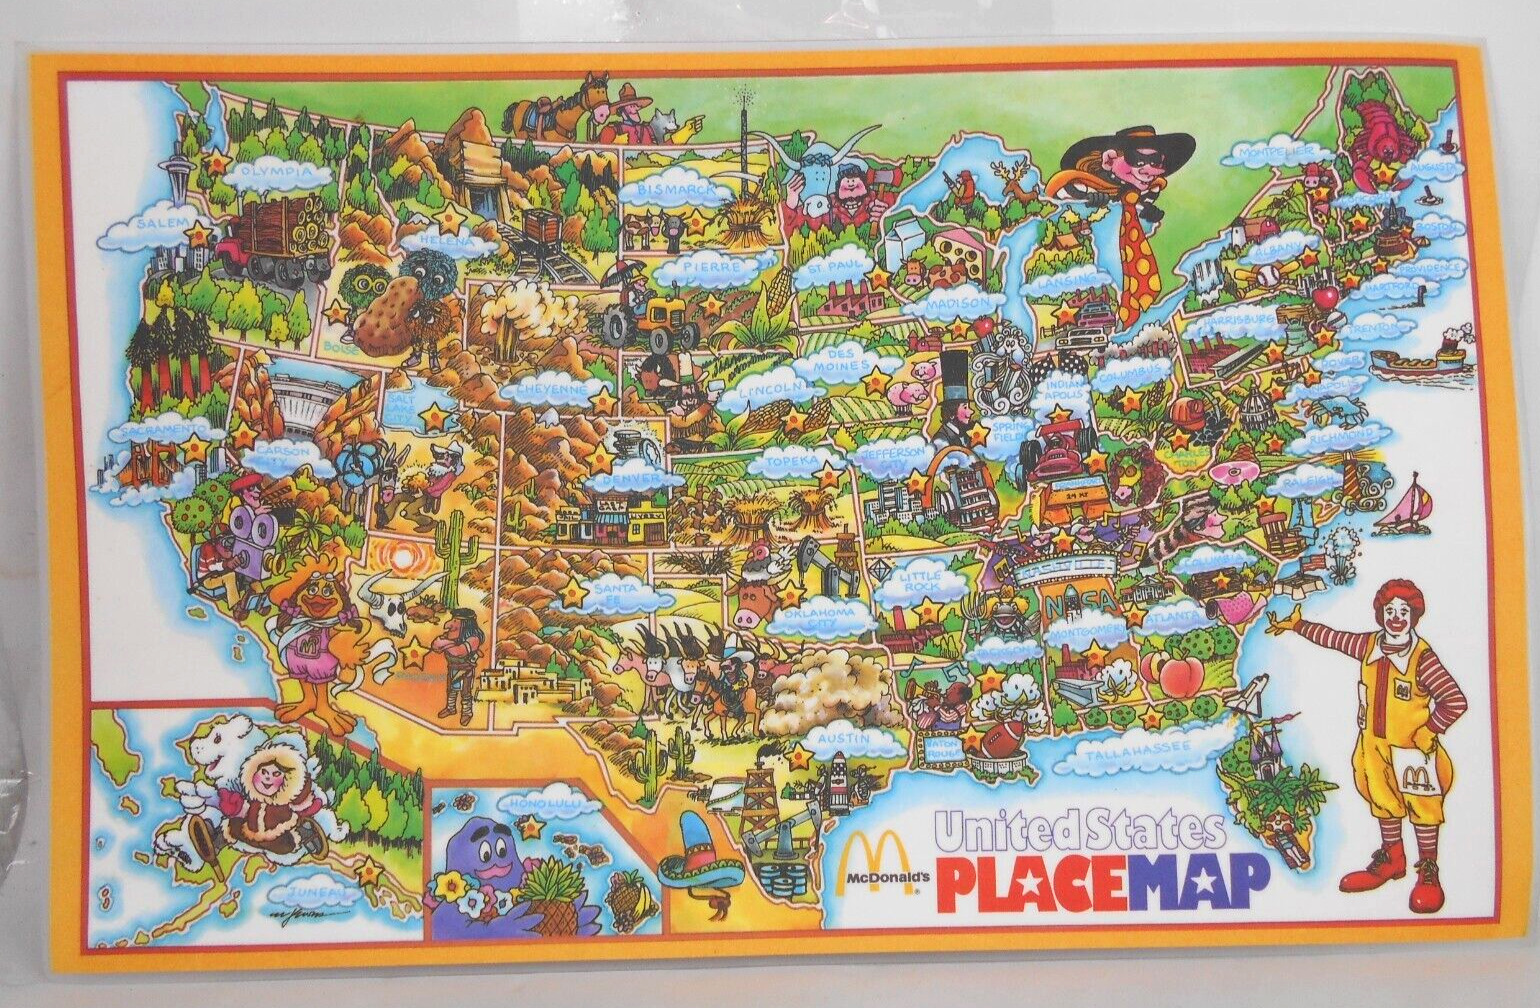 McDonalds Placemat Map States and Capitals Coast Game Laminated 1984